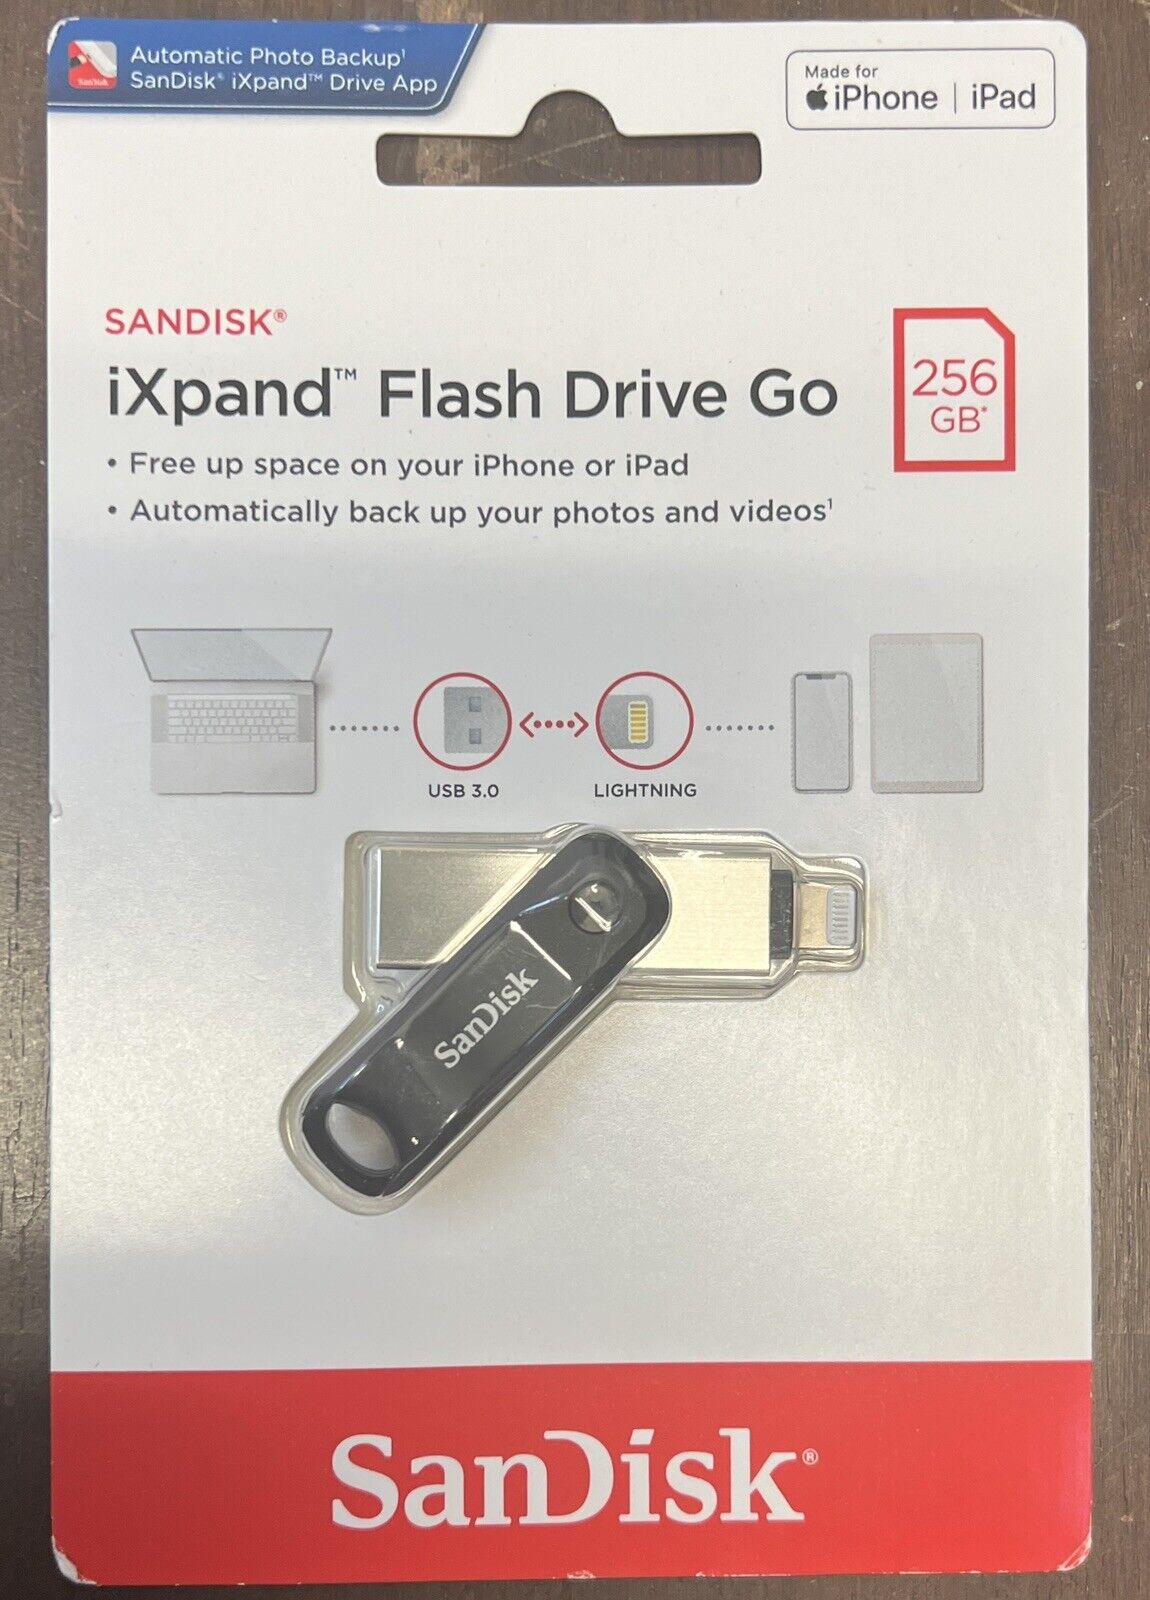 SanDisk iXpand 256GB Flash Drive Go iPhone / iPad Brand New In Sealed Package